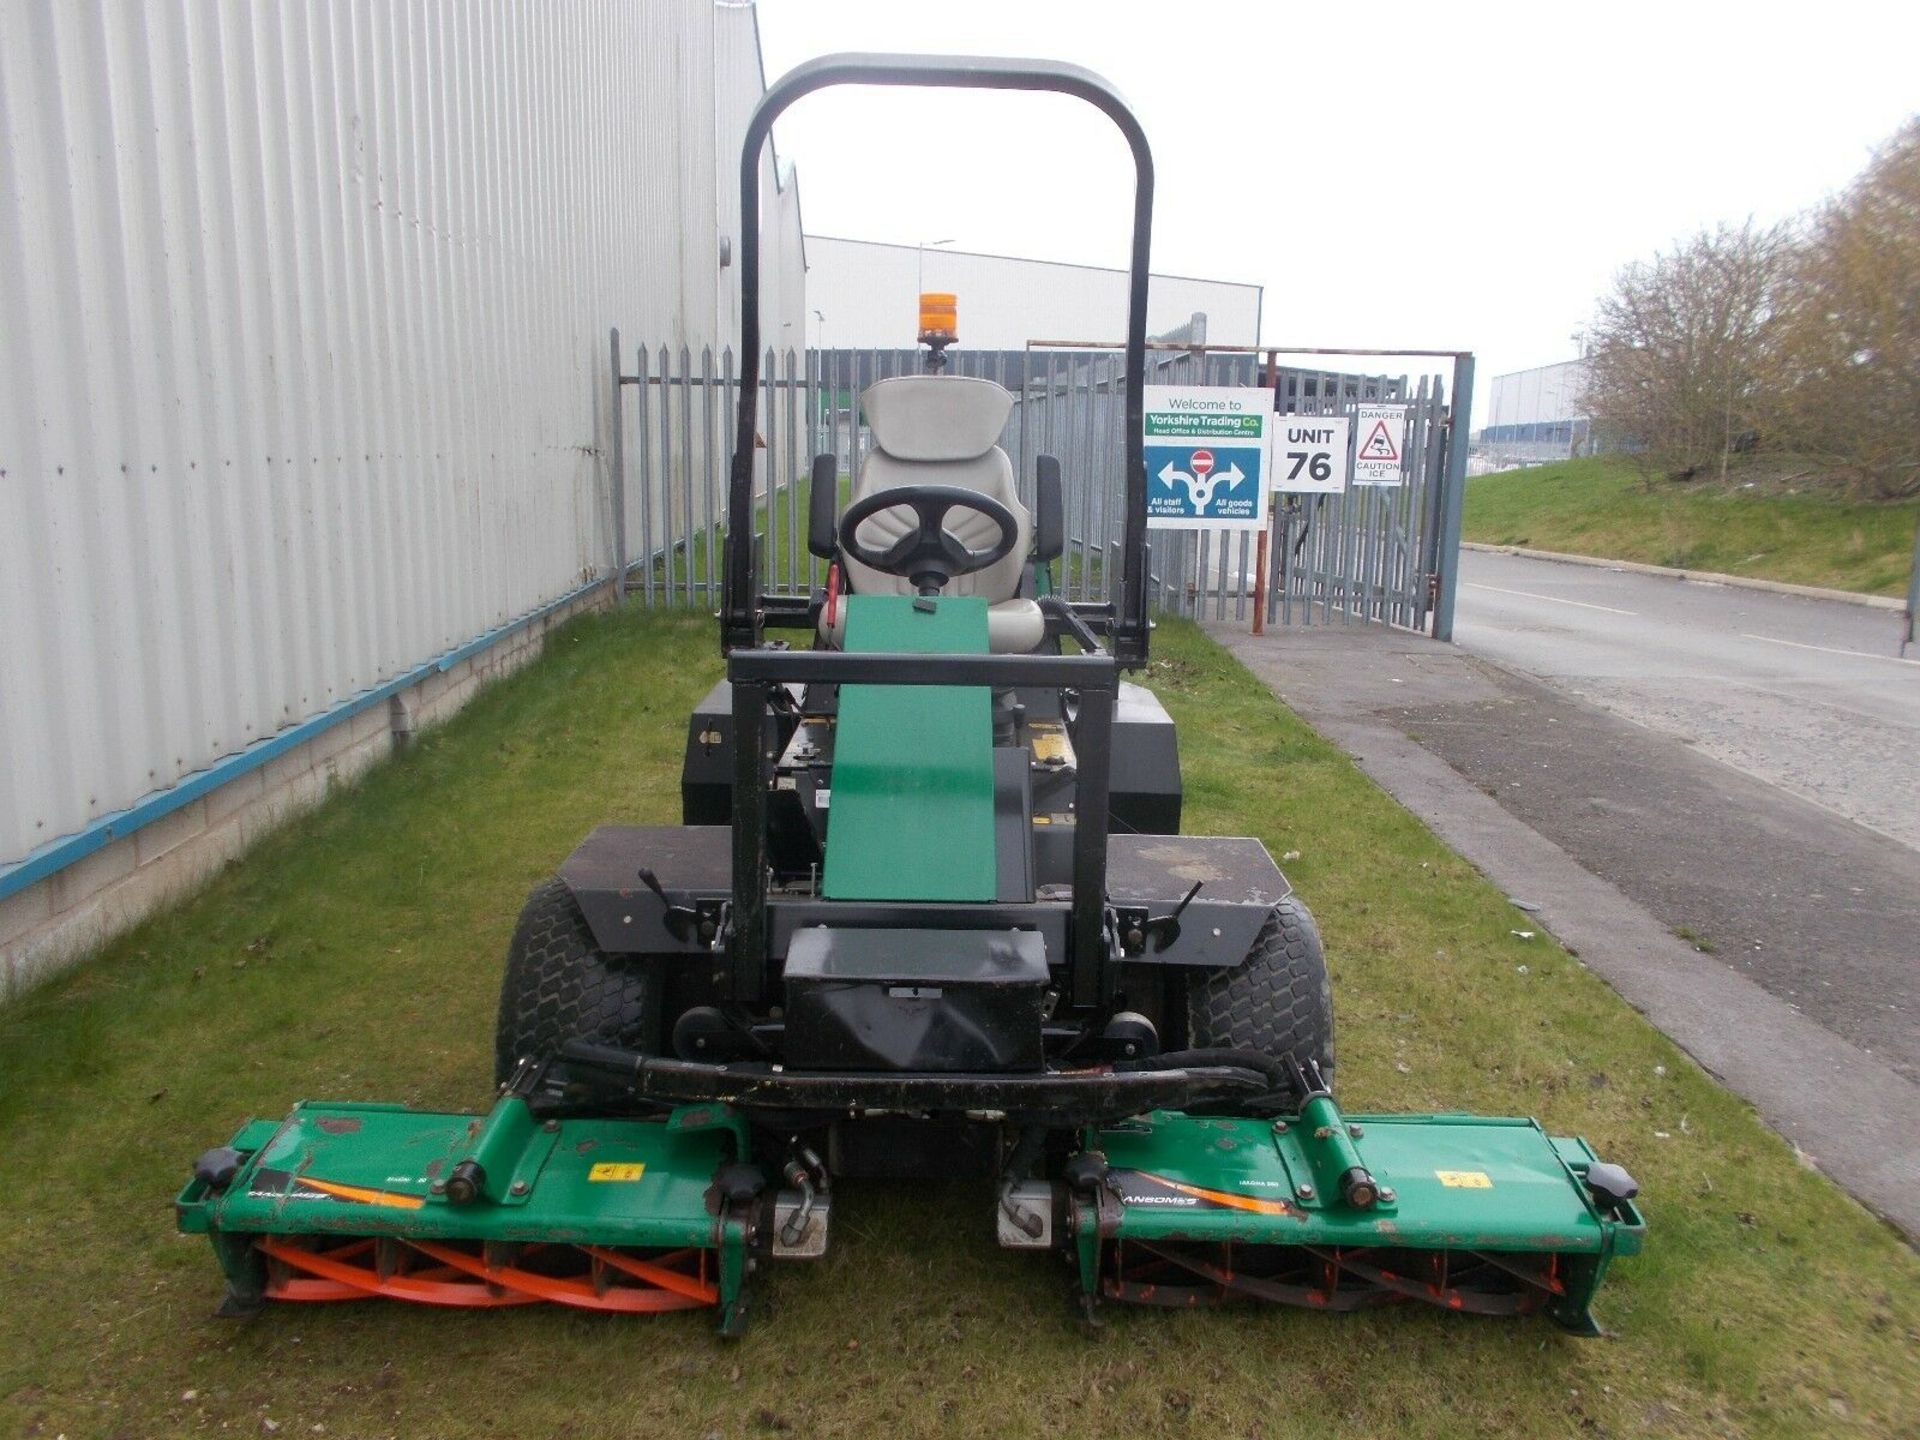 2009 Ransomes 2250 Parkway Plus Ride on Mower - Image 10 of 10